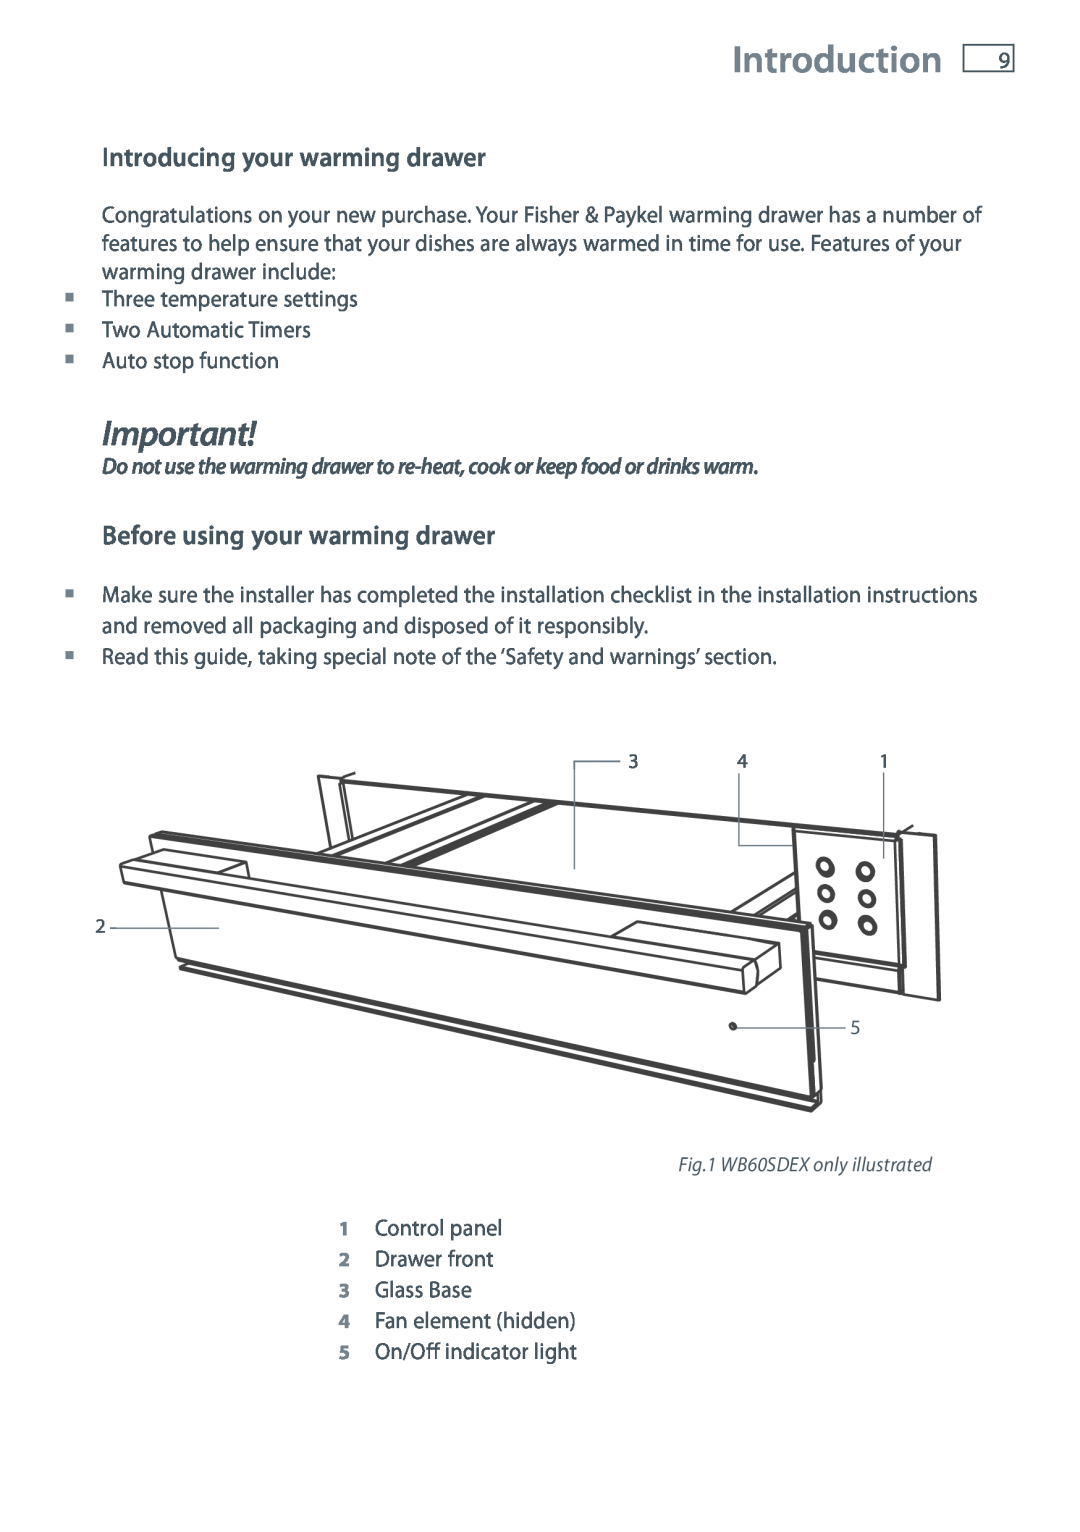 Fisher & Paykel W860SD manual Introduction, Introducing your warming drawer, Before using your warming drawer 